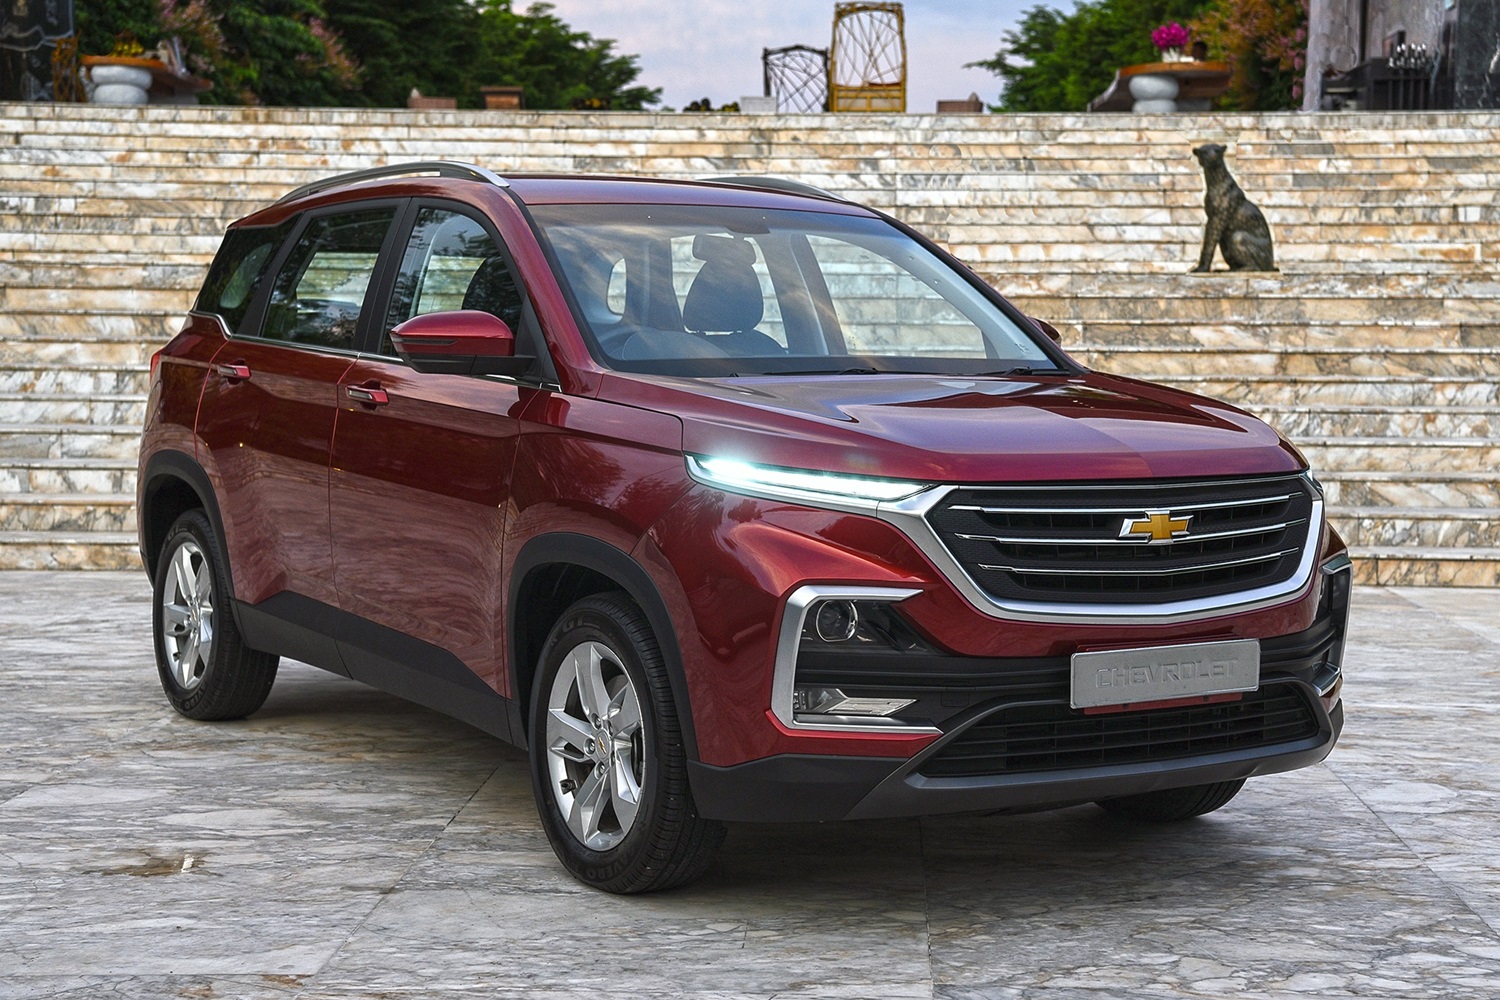 Gm Plans To Introduce New Chevrolet Captiva In Mexico Gm Authority